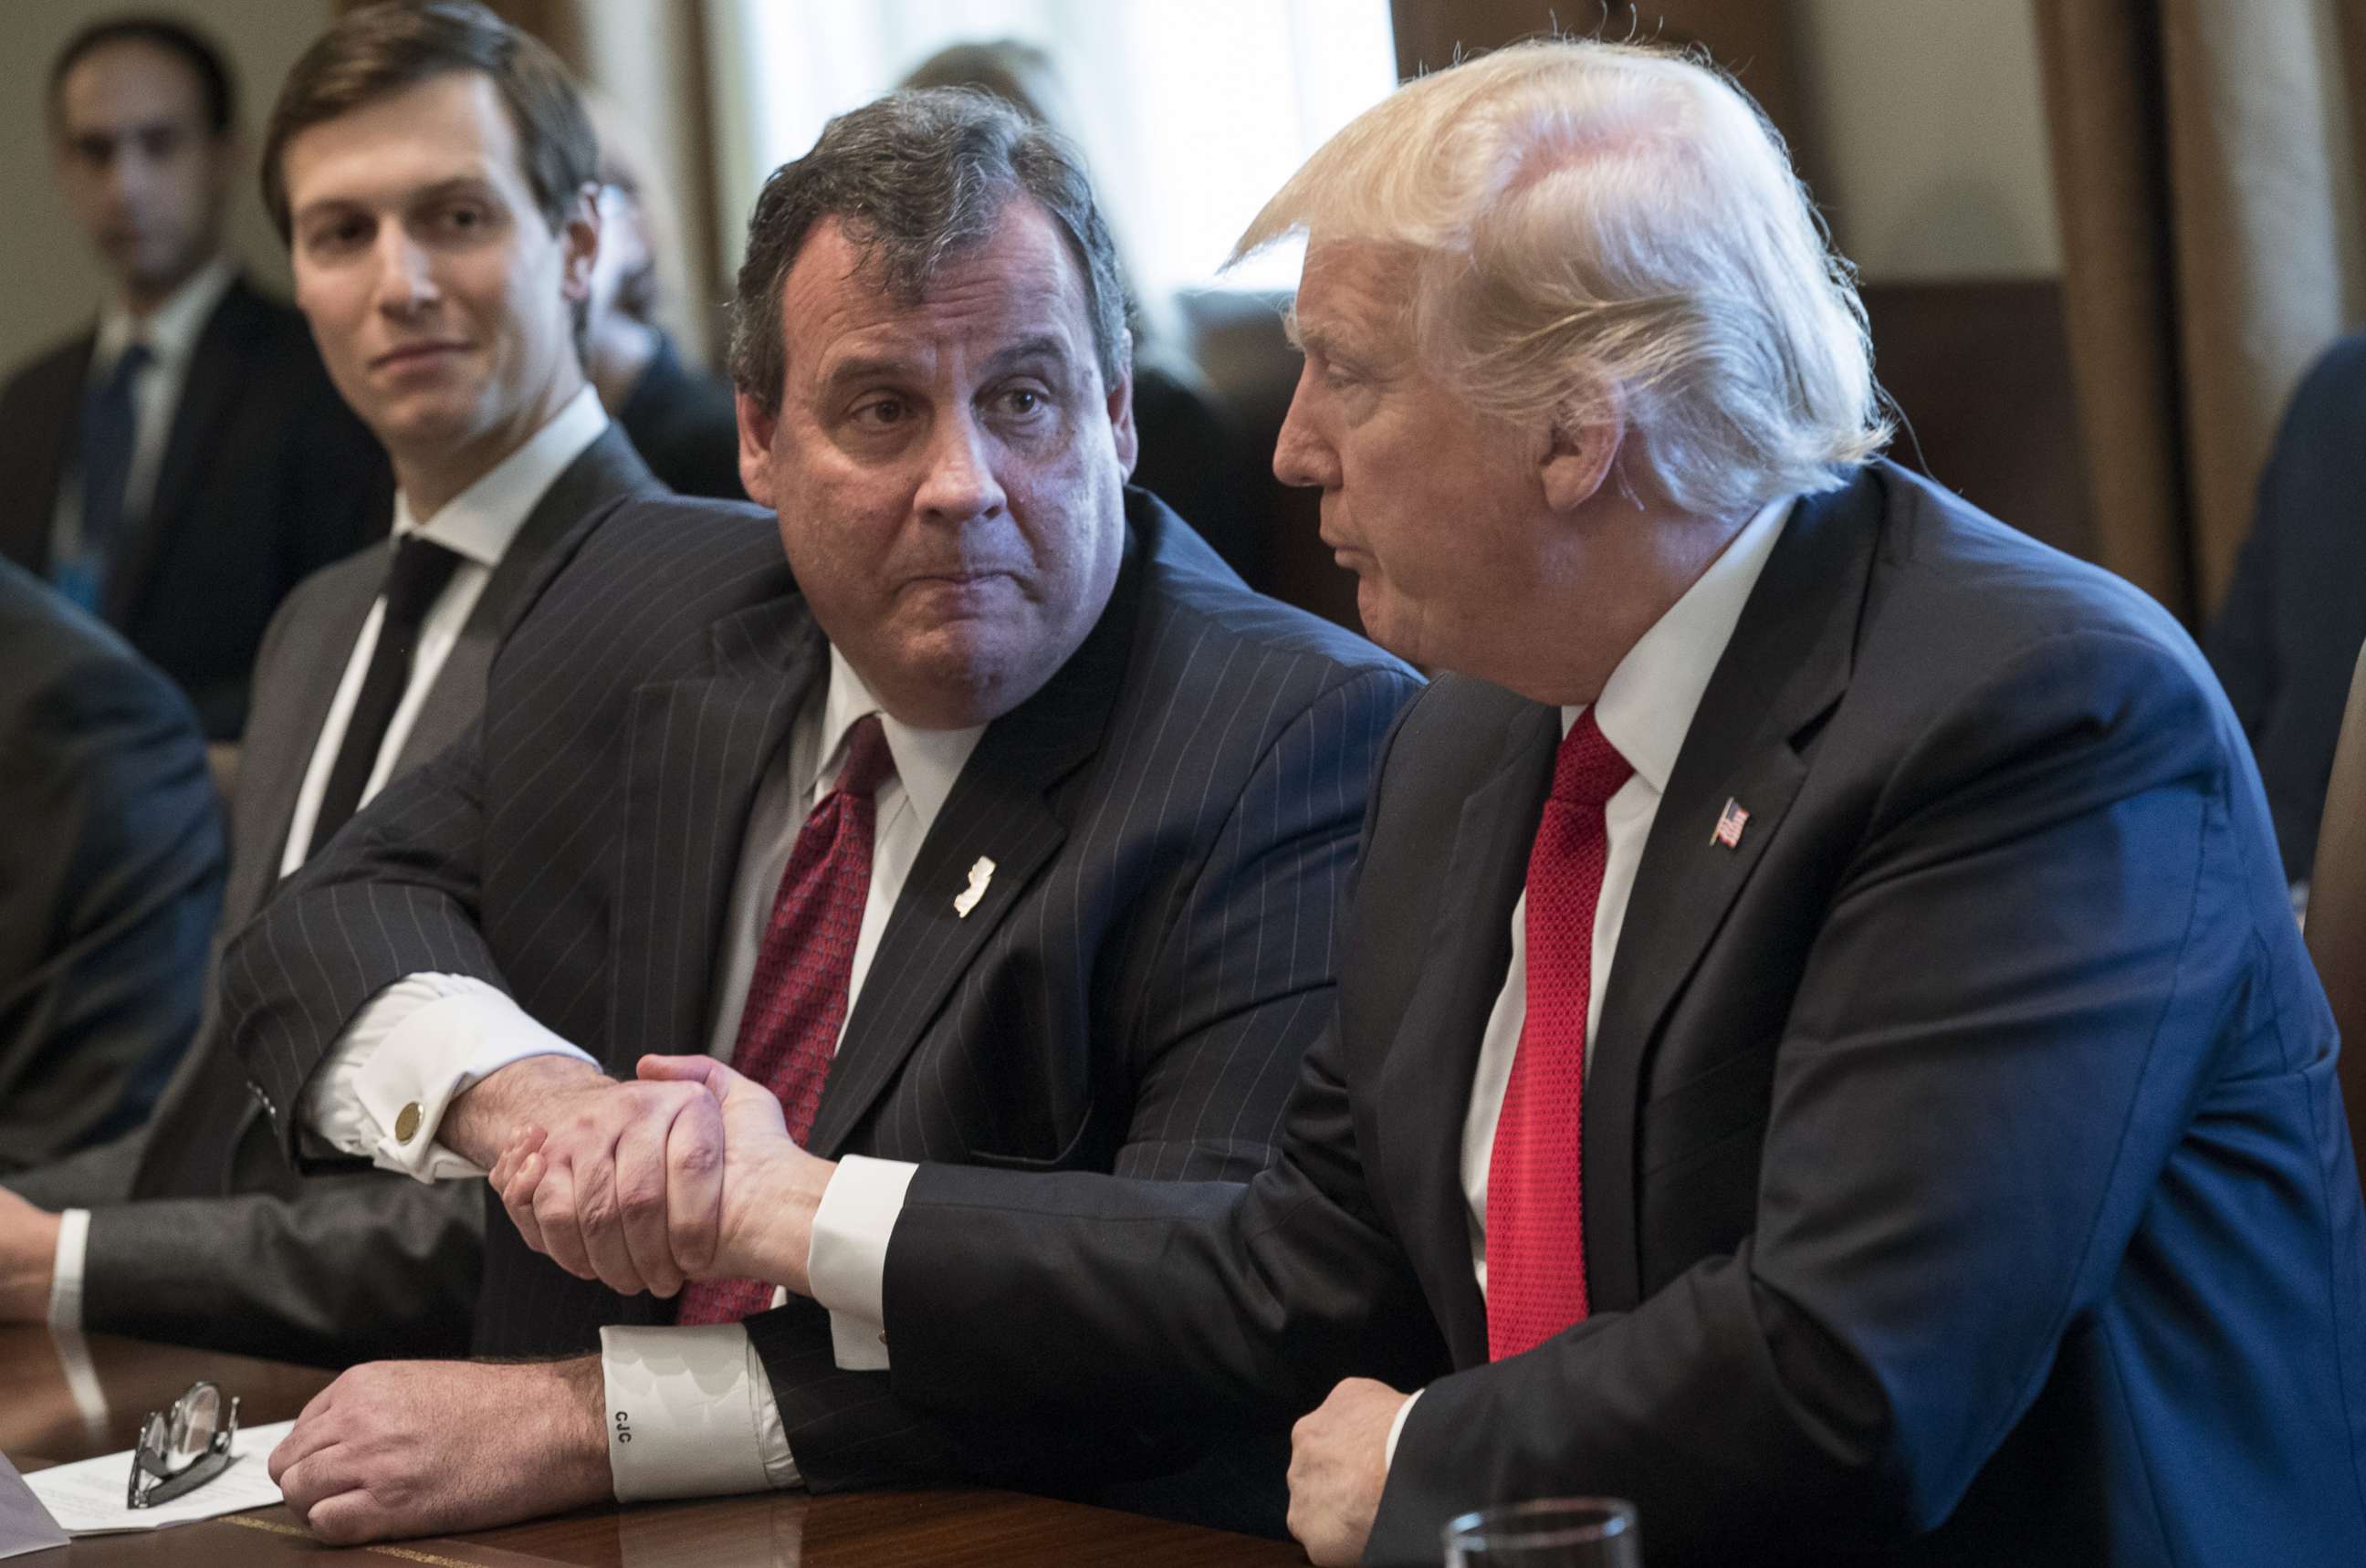 PHOTO: From left, White House senior adviser Jared Kushner, New Jersey Gov. Chris Christie and President Donald Trump attend a panel discussion on opioid and drug abuse in the Roosevelt Room of the White House, March 29, 2017. 